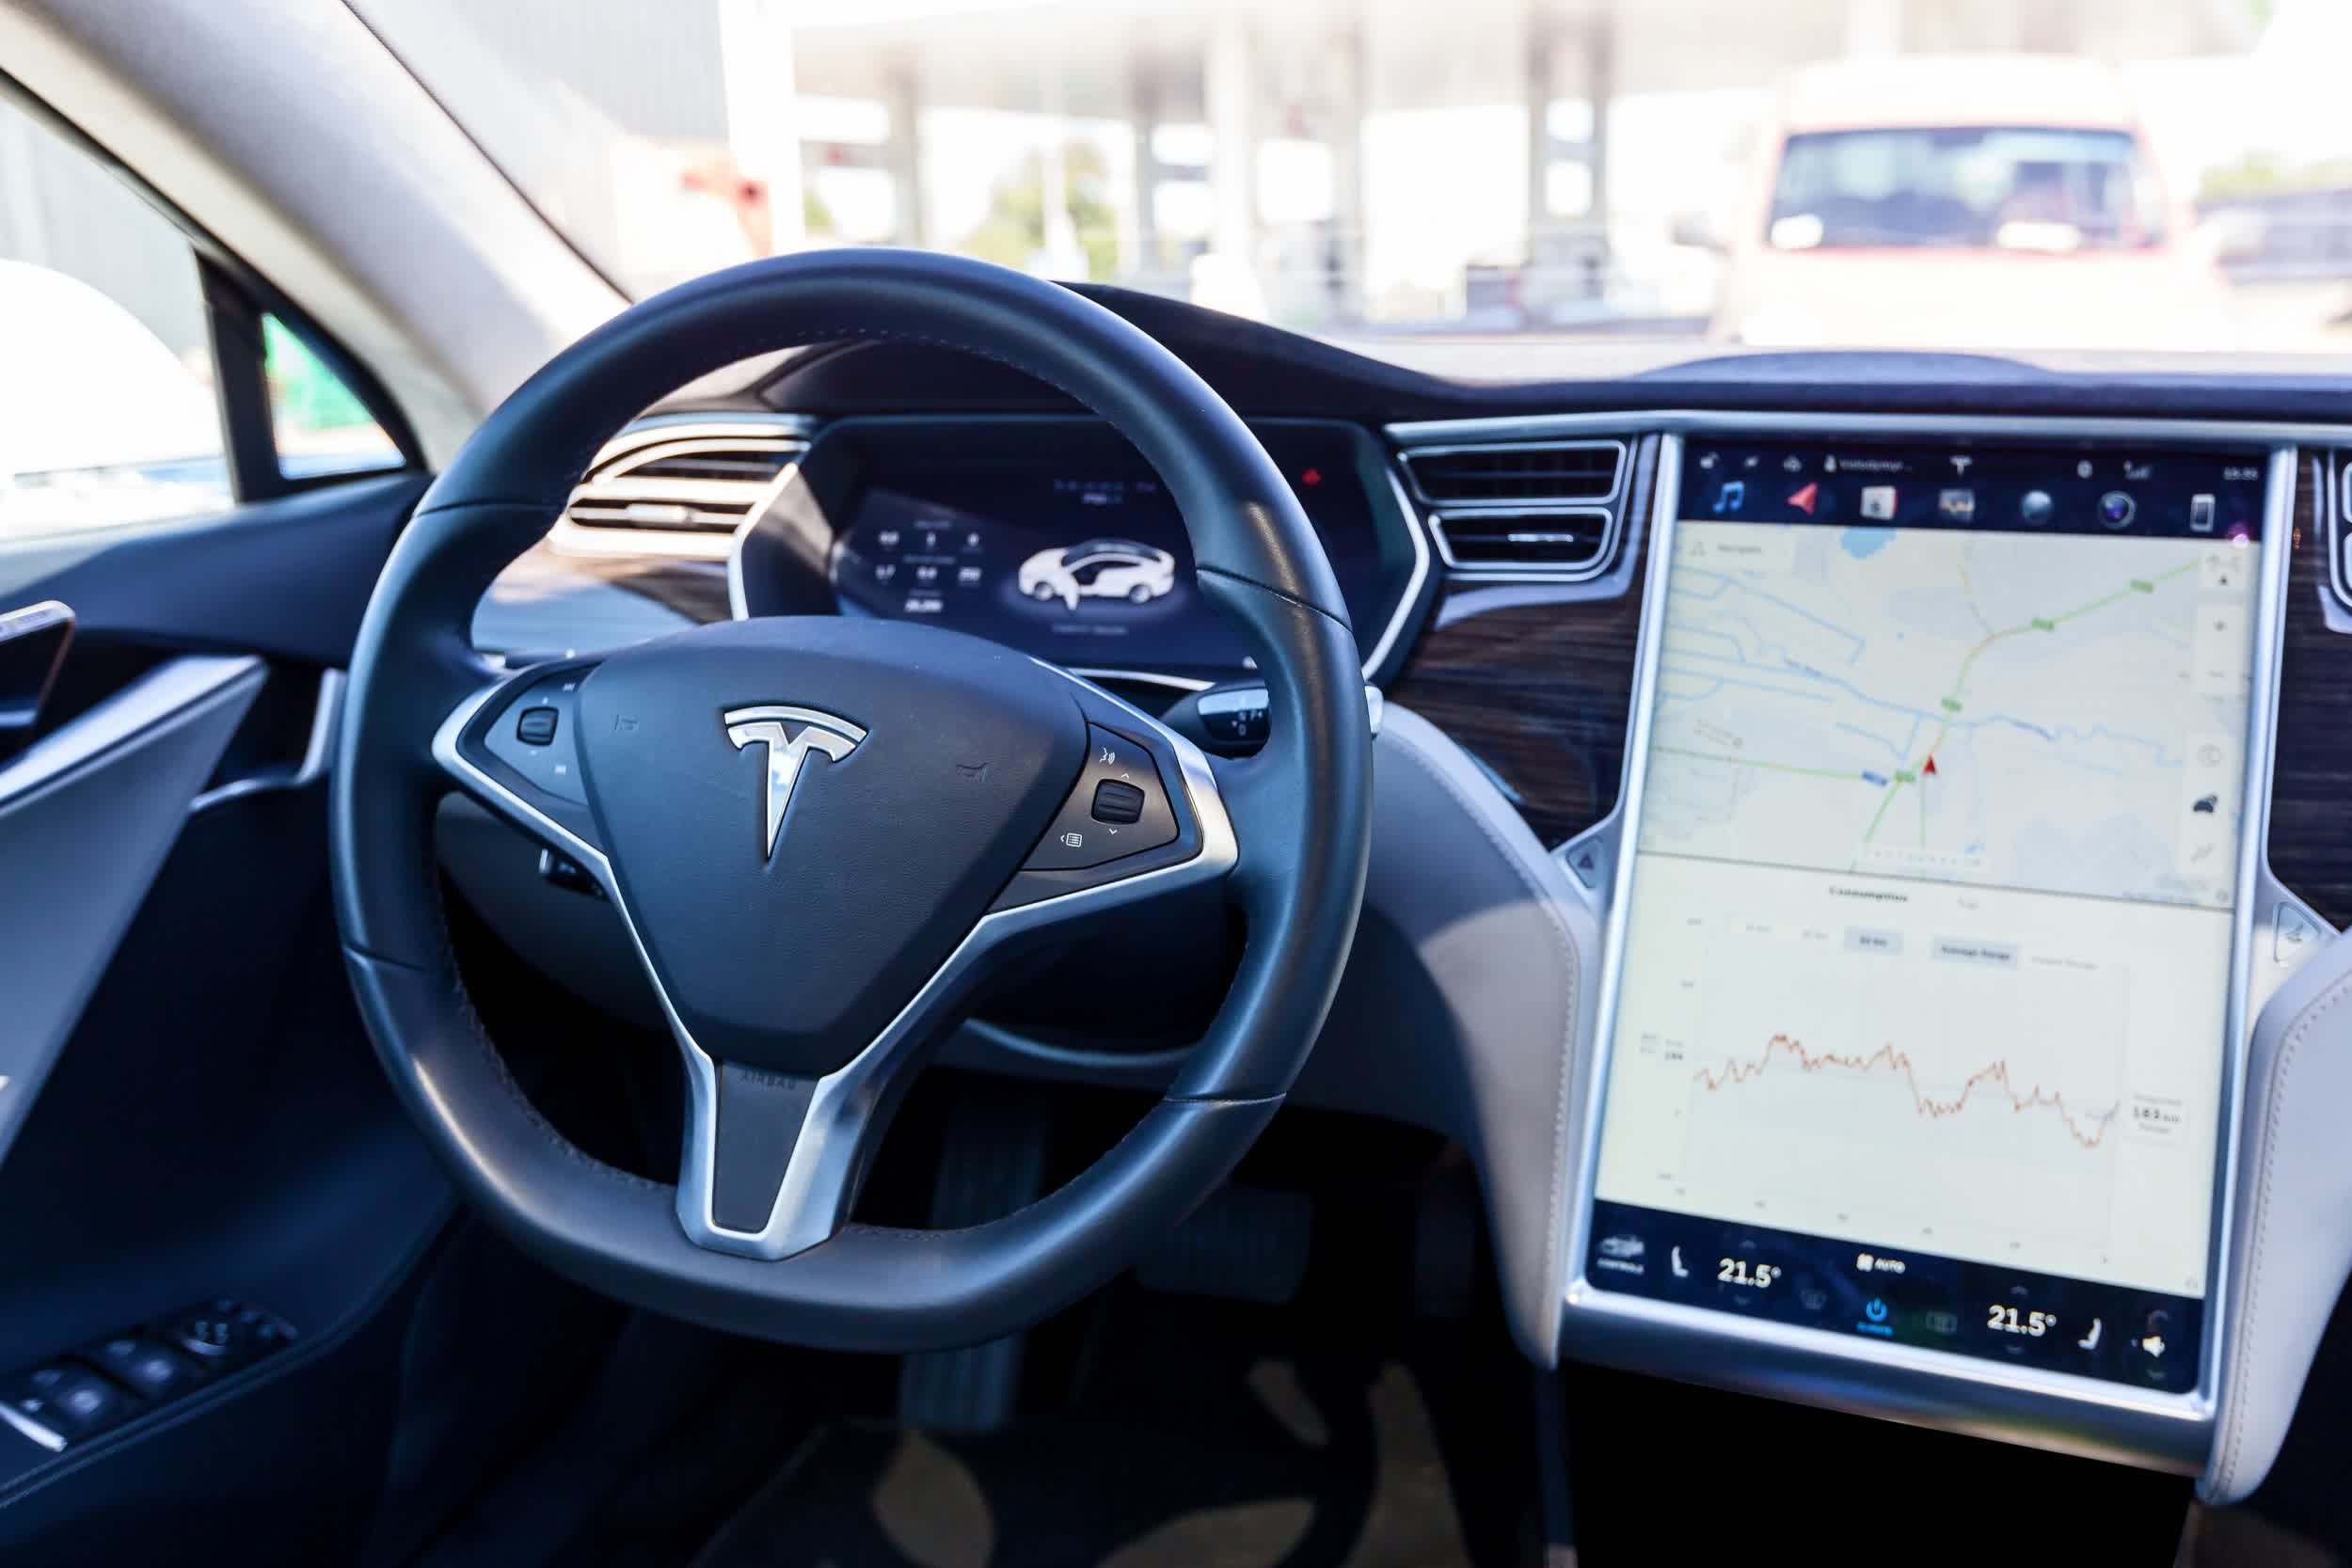 Consumer Reports drives a Tesla with nobody in the driver's seat